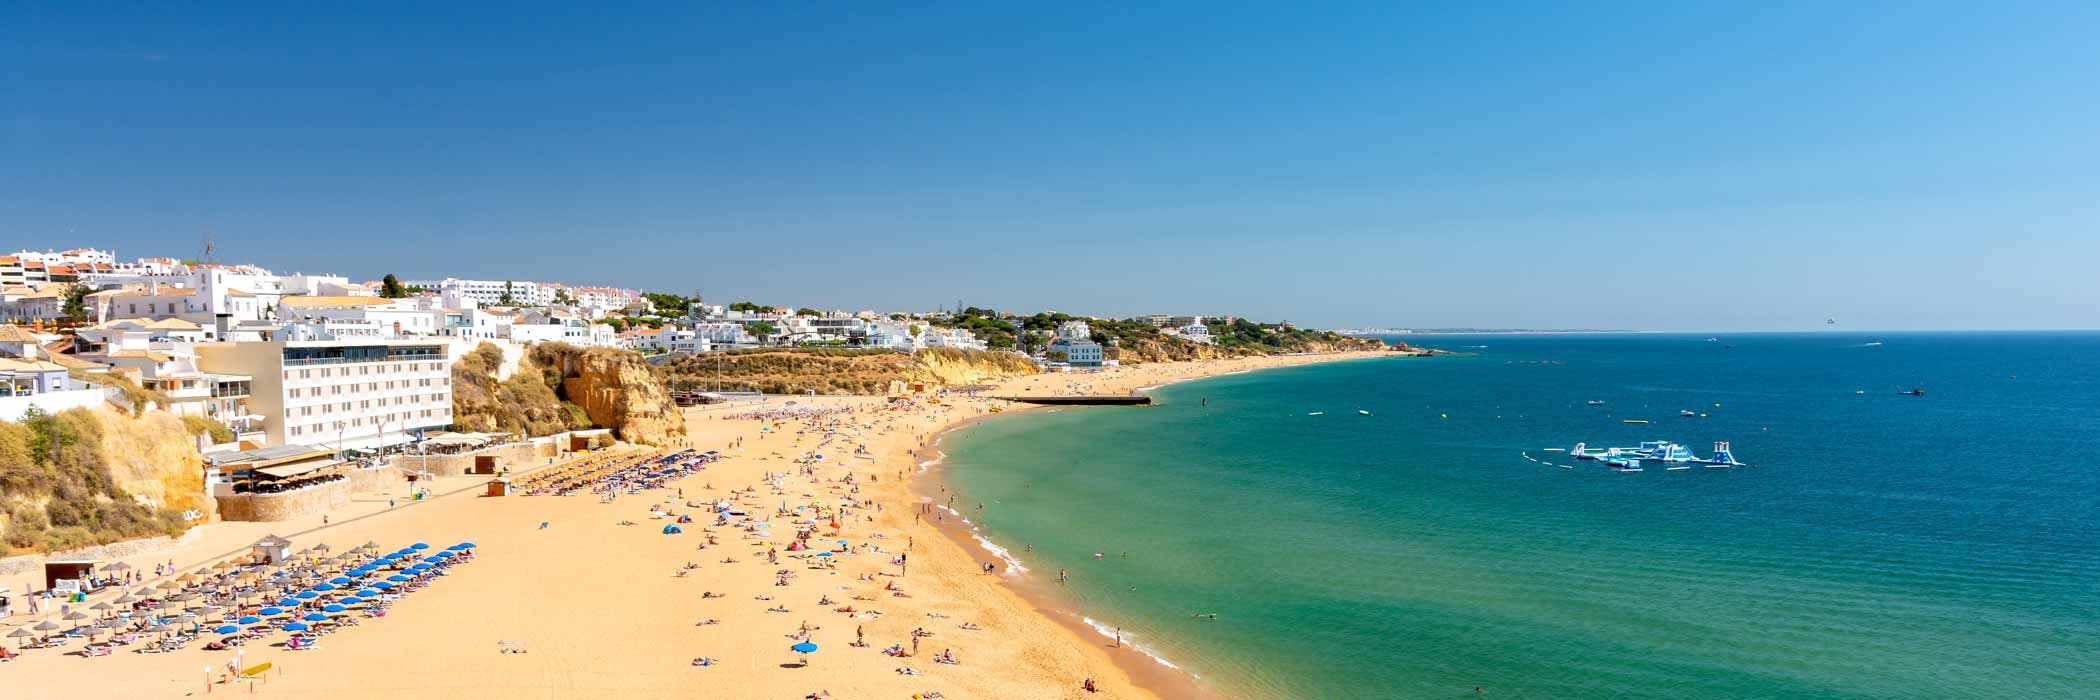 Holidays to Algarve from Newcastle